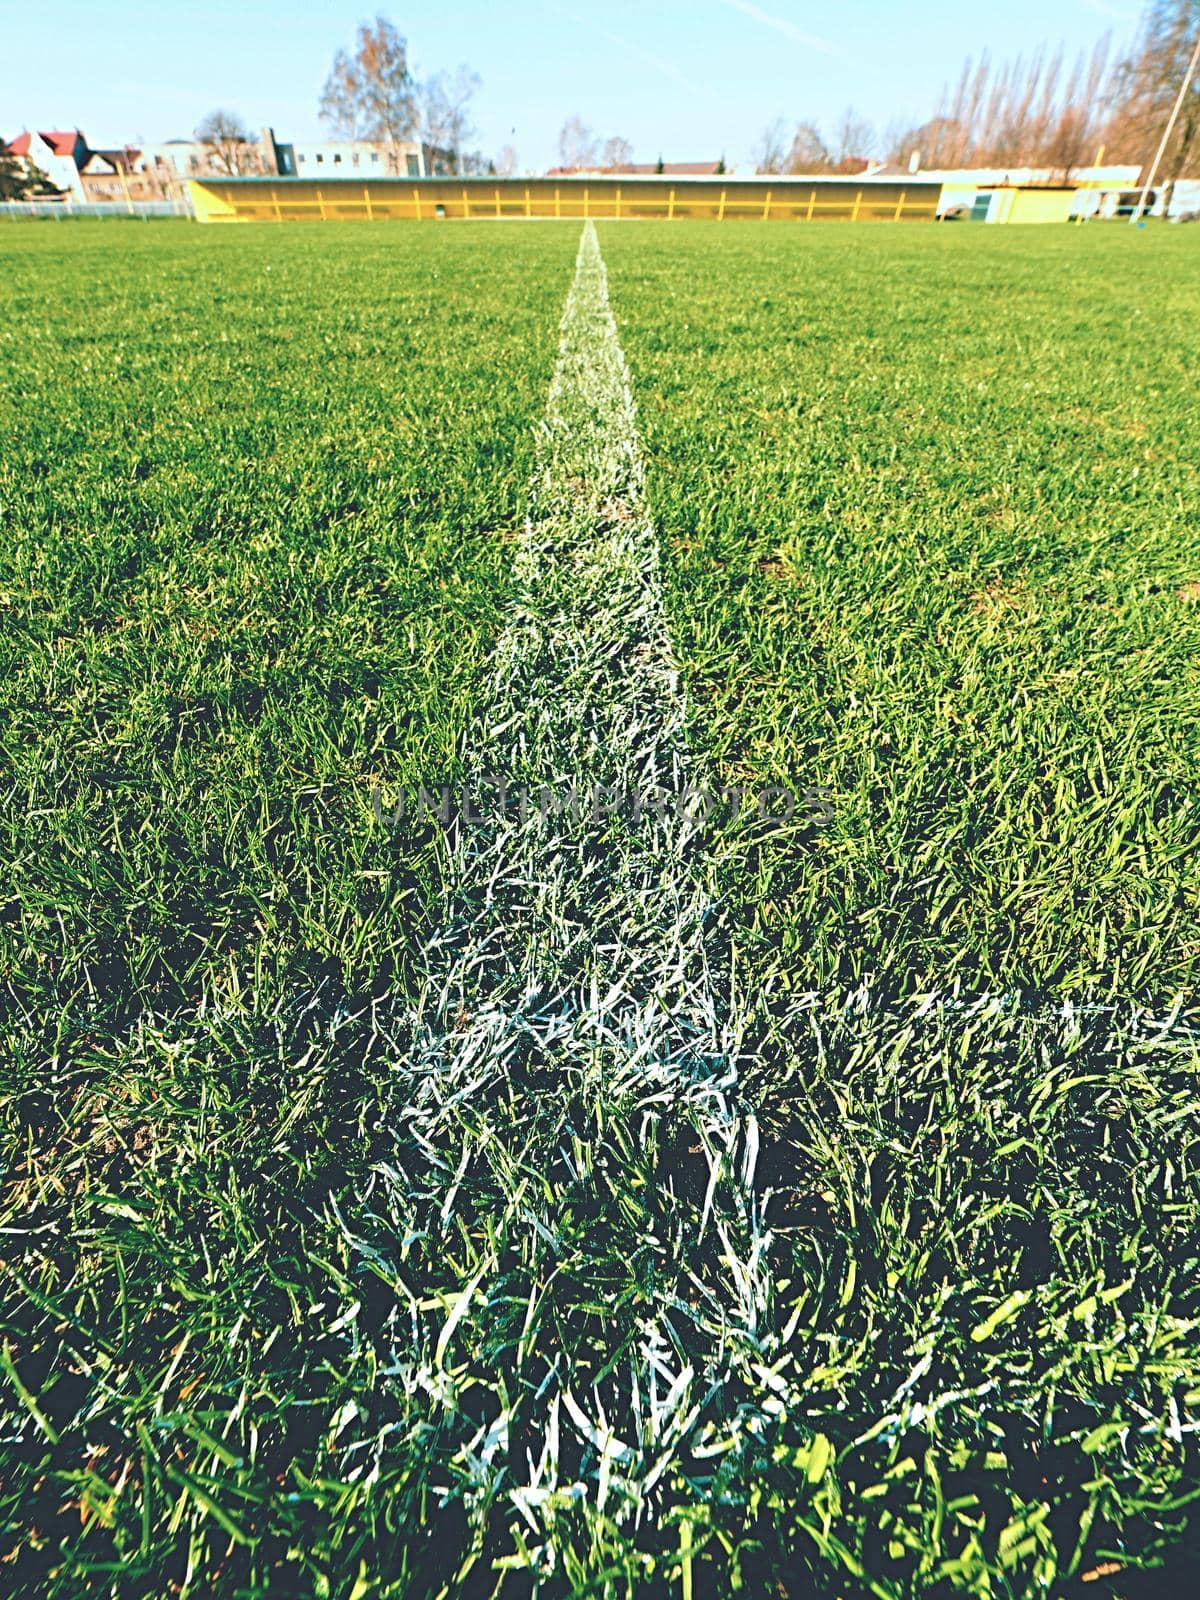 Border of painted white lines on natural dry football grass. Cut green turf texture.  by rdonar2